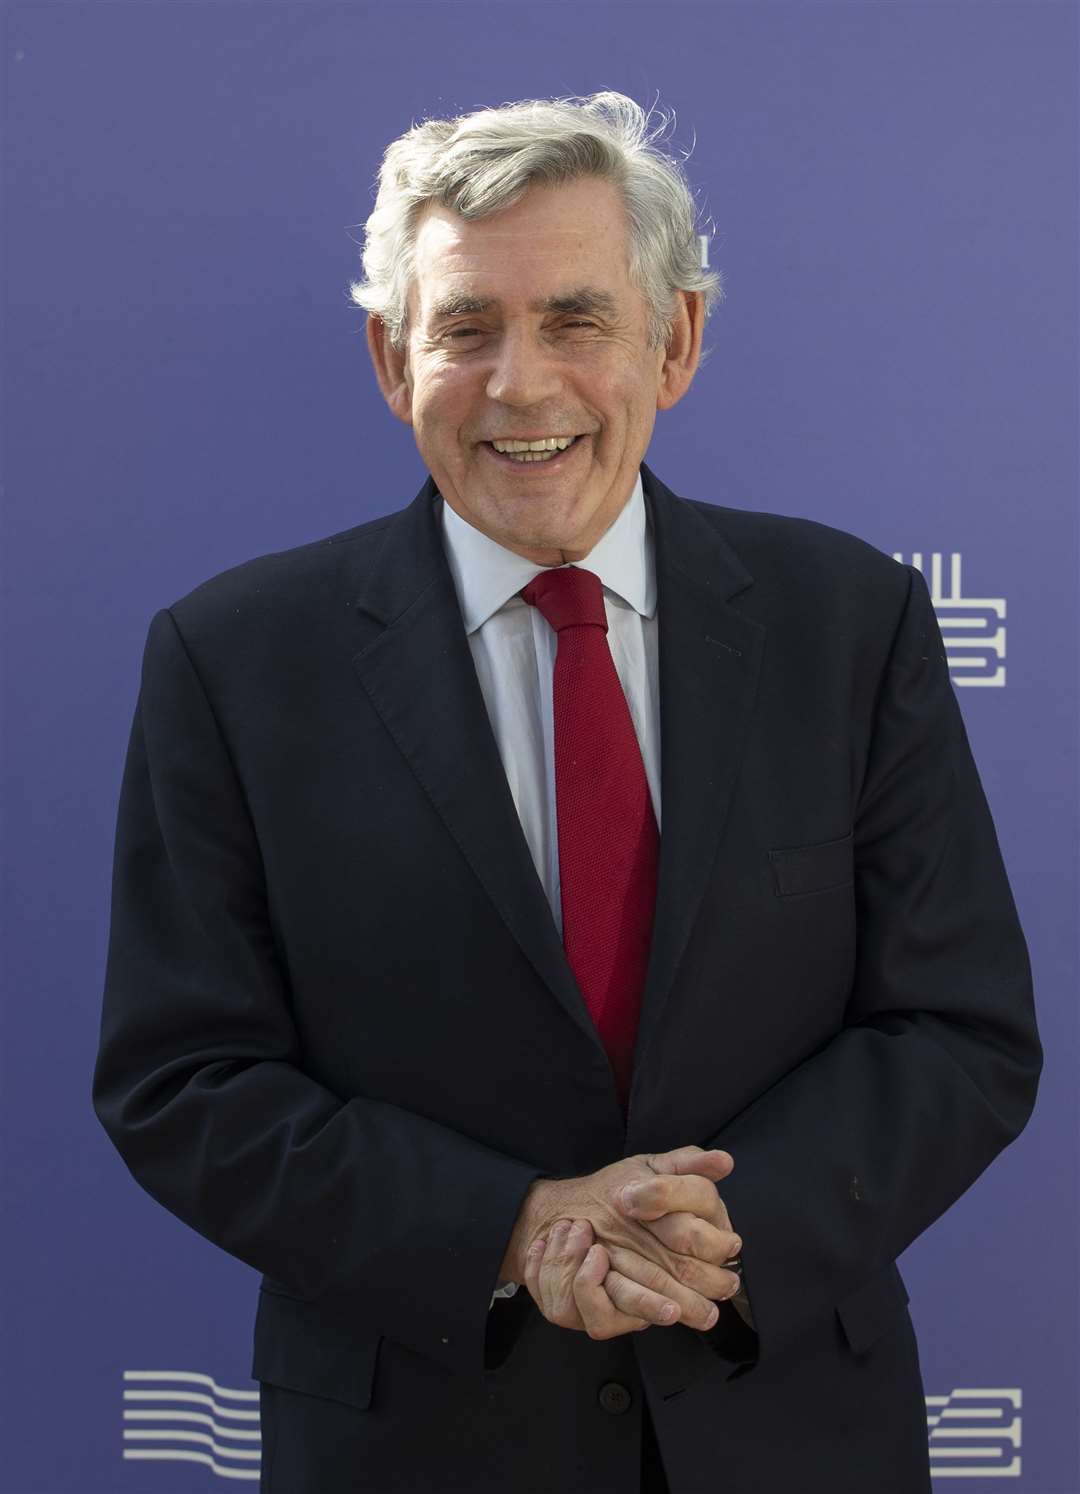 Former prime minister Gordon Brown said the rules may need to be toughened to prevent ex-premiers lobbying the Government (Jane Barlow/PA)